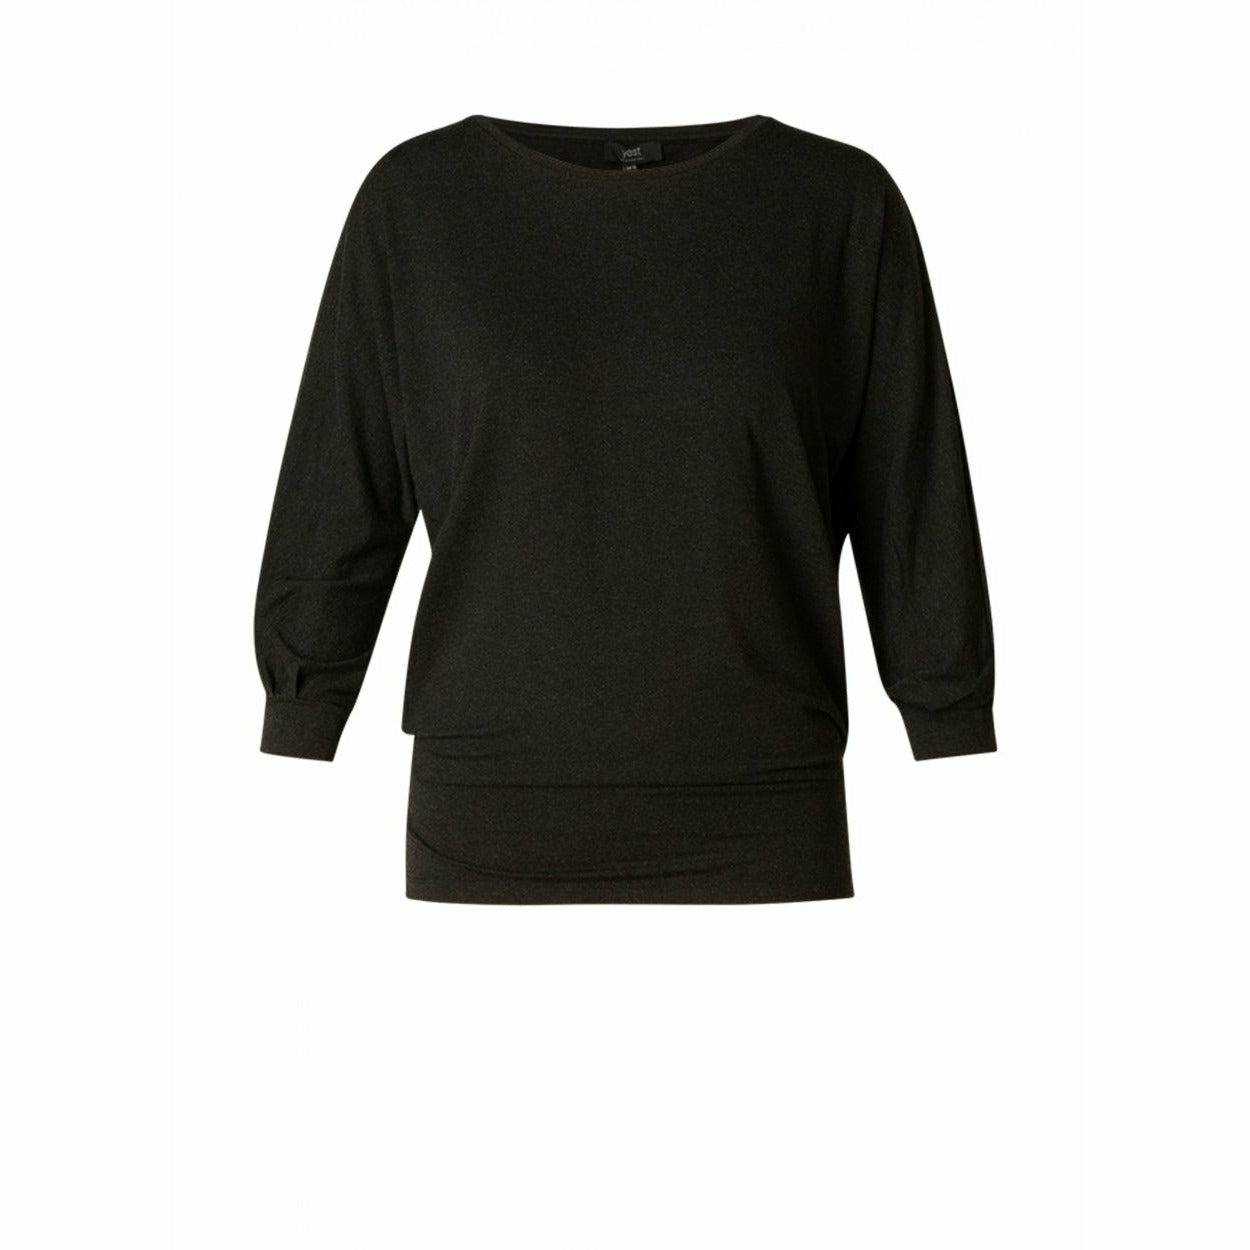 3/4 Sleeve Comfy Jersey Top - Plus